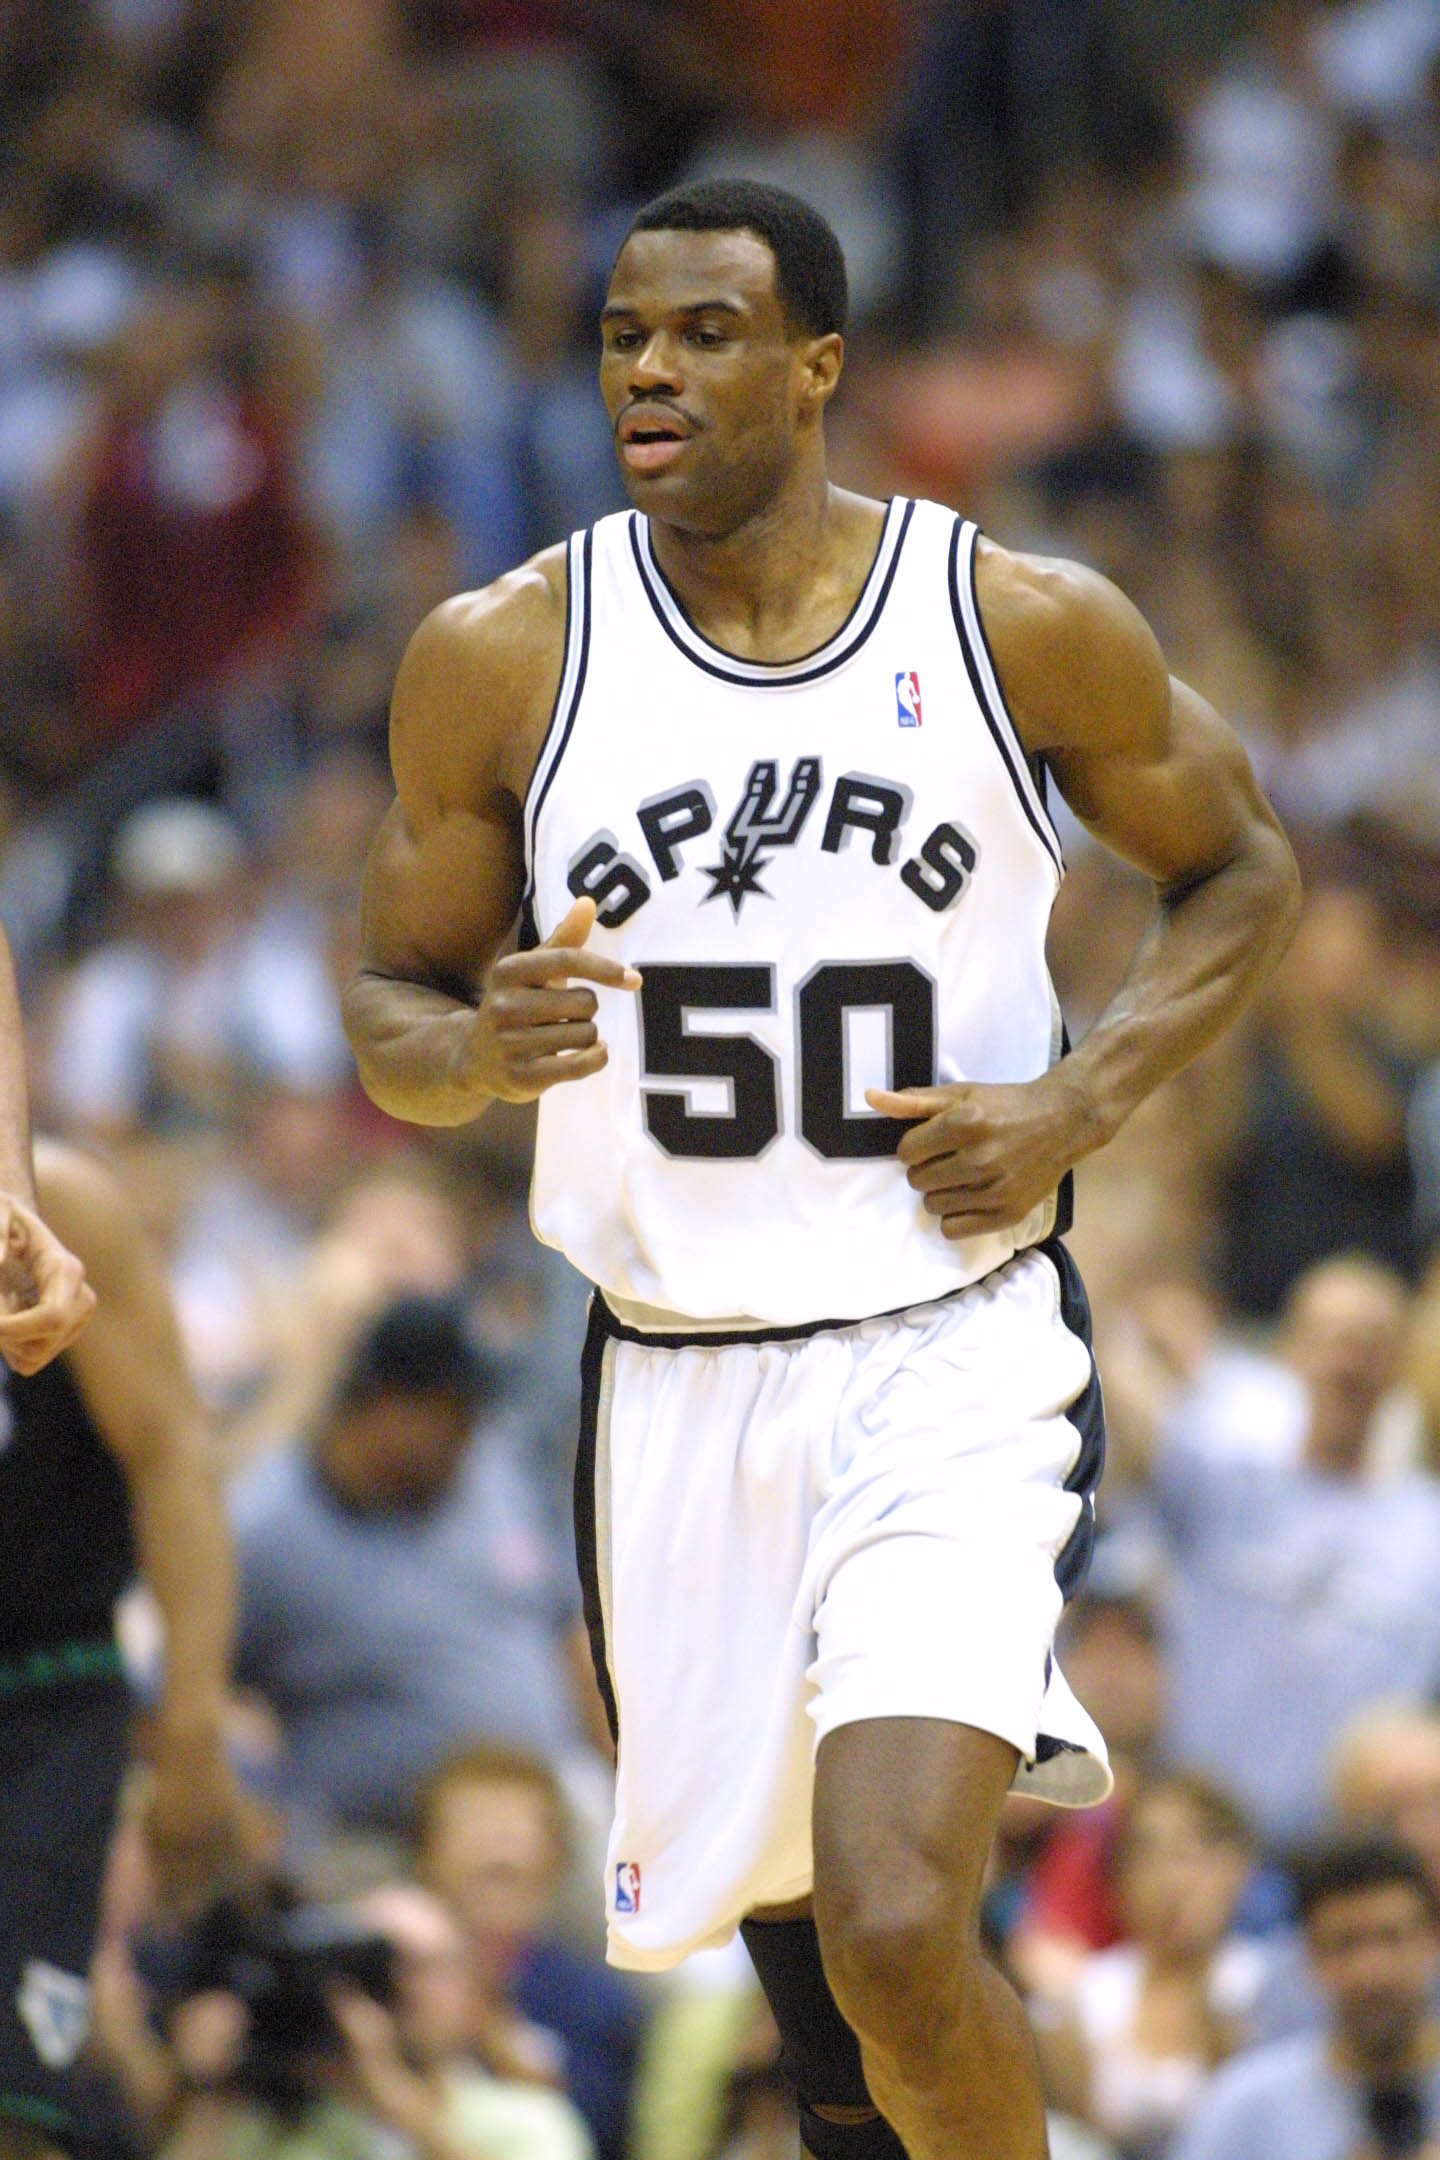 21 Apr 2001:  David Robinson #50 of the San Antonio Spurs  in game one of the NBA playoffs against the Minnesota Timberwolves at the Alamodome in San Antonio, Texas.  The Spurs won 87-82.  DIGITAL IMAGE.  Mandatory Credit: Ronald Martinez/Allsport